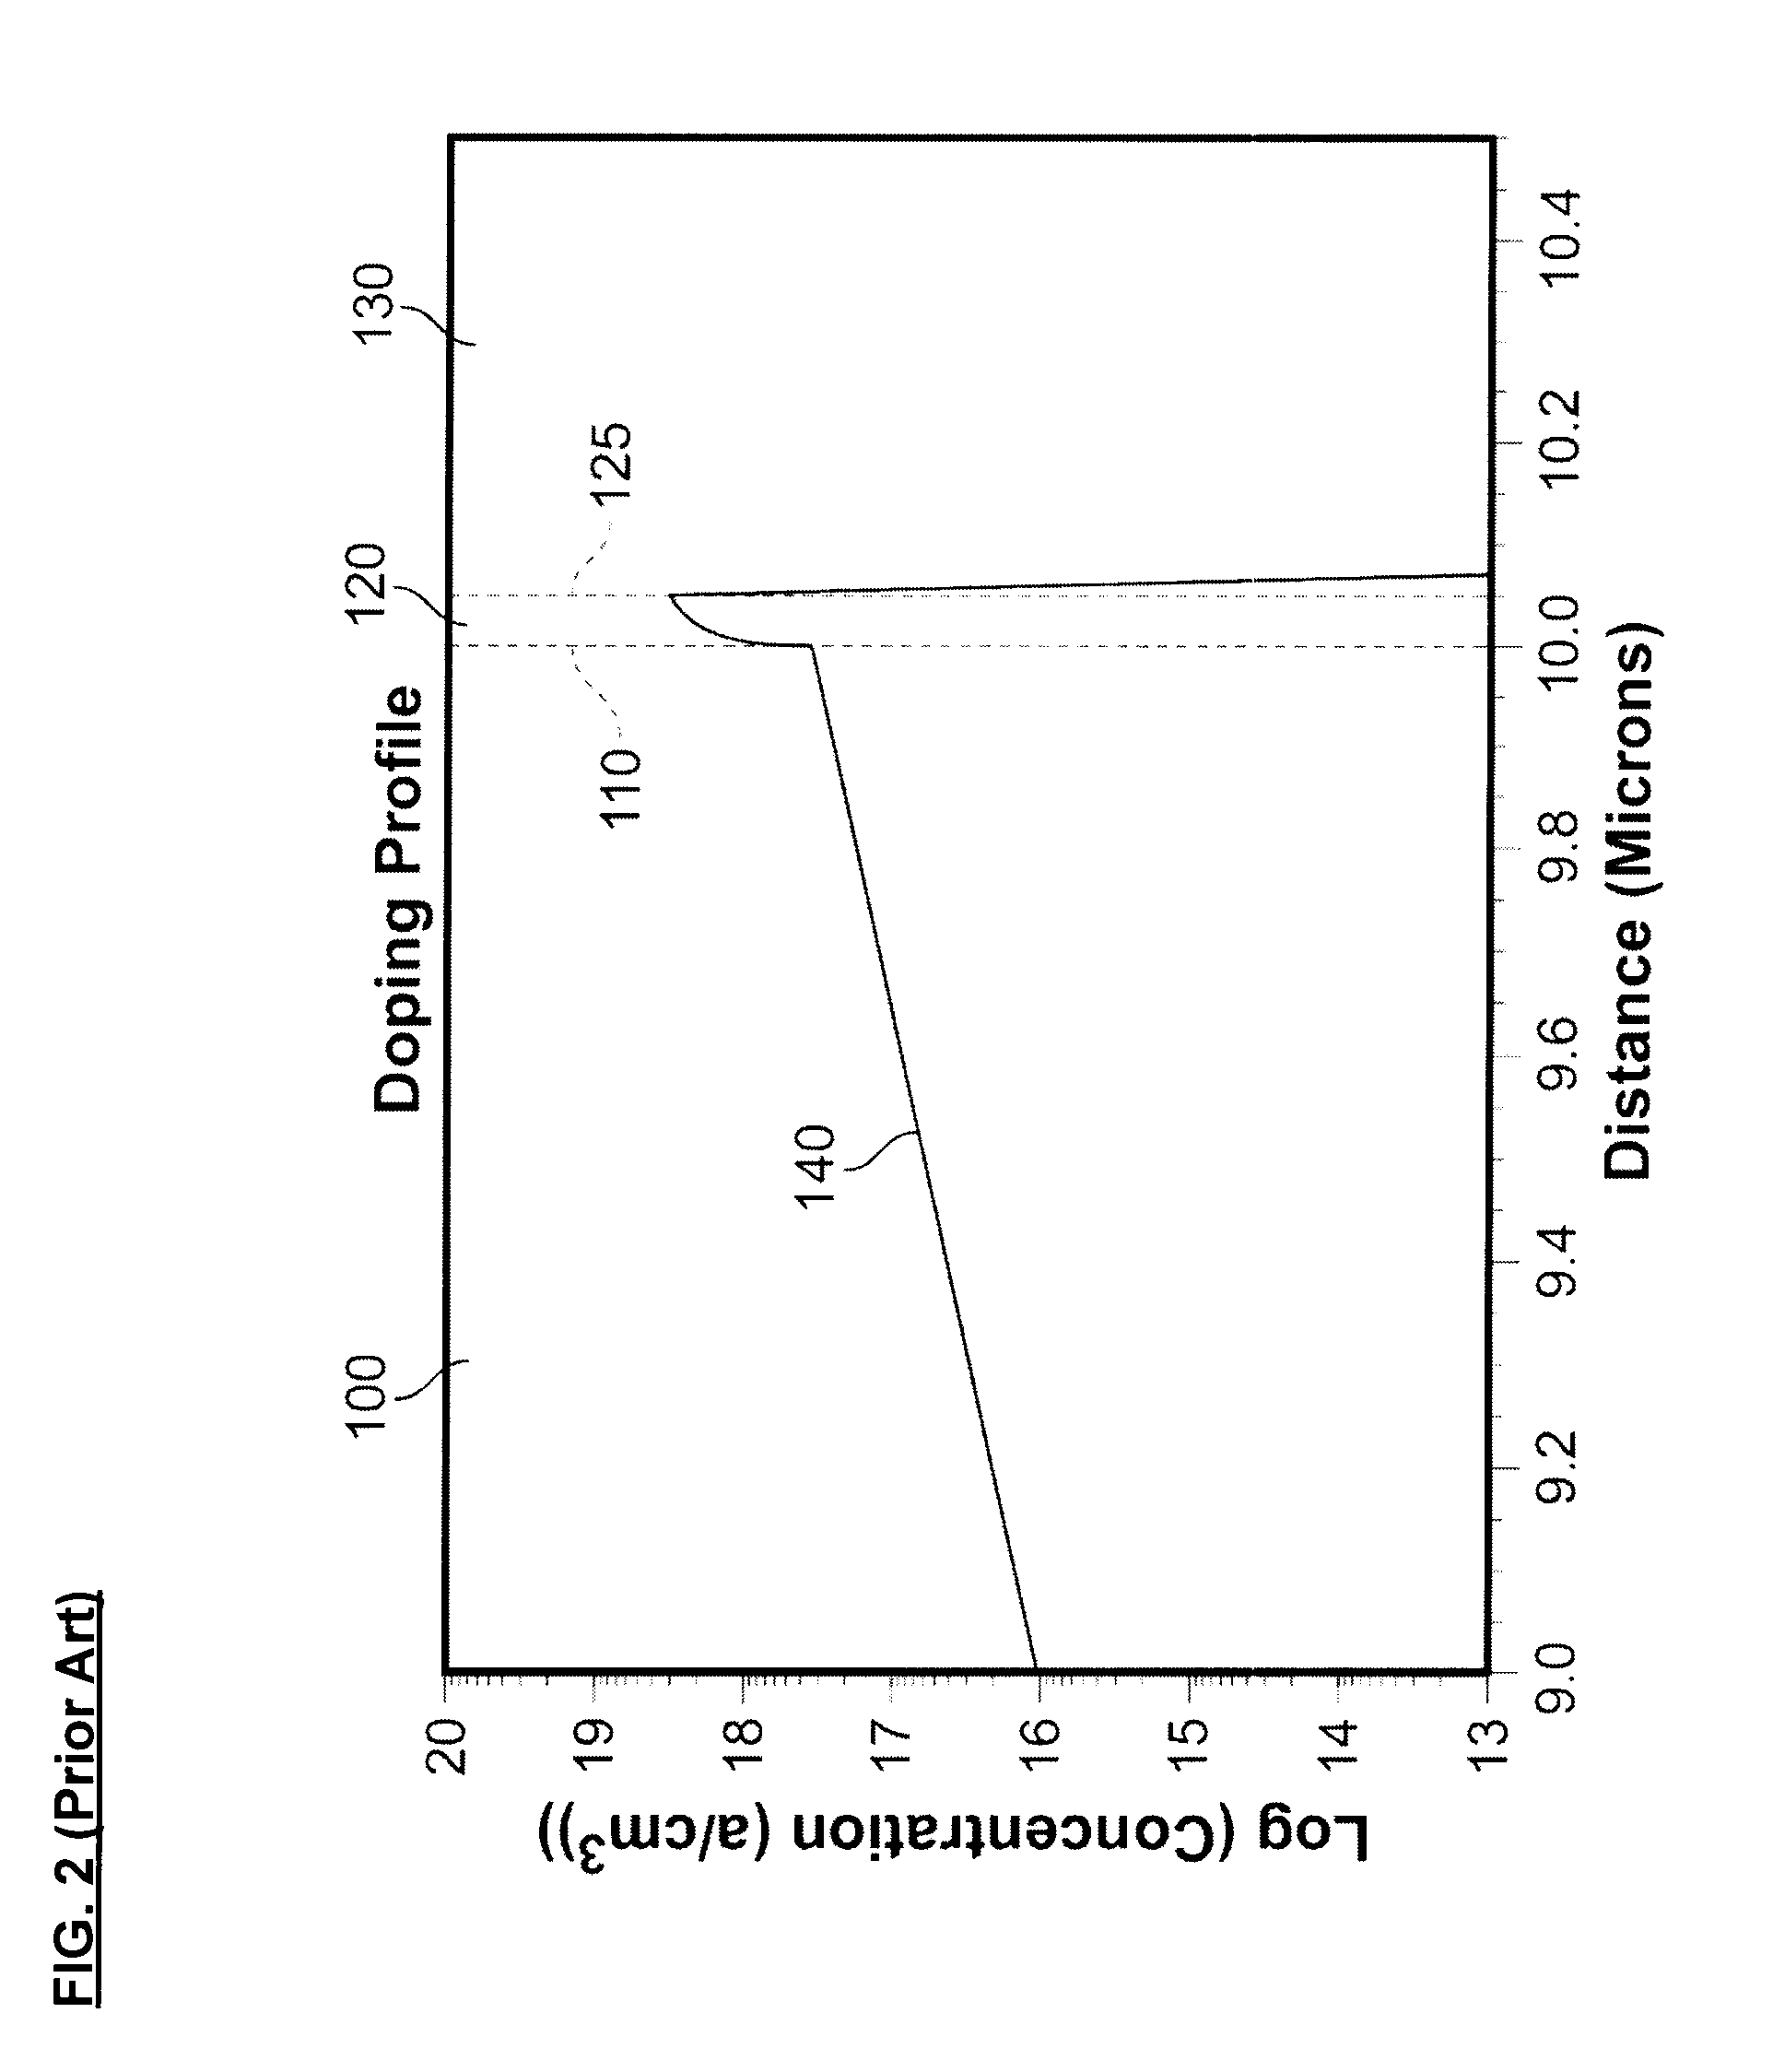 Method for electronically pinning a back surface of a back-illuminated imager fabricated on a utsoi wafer